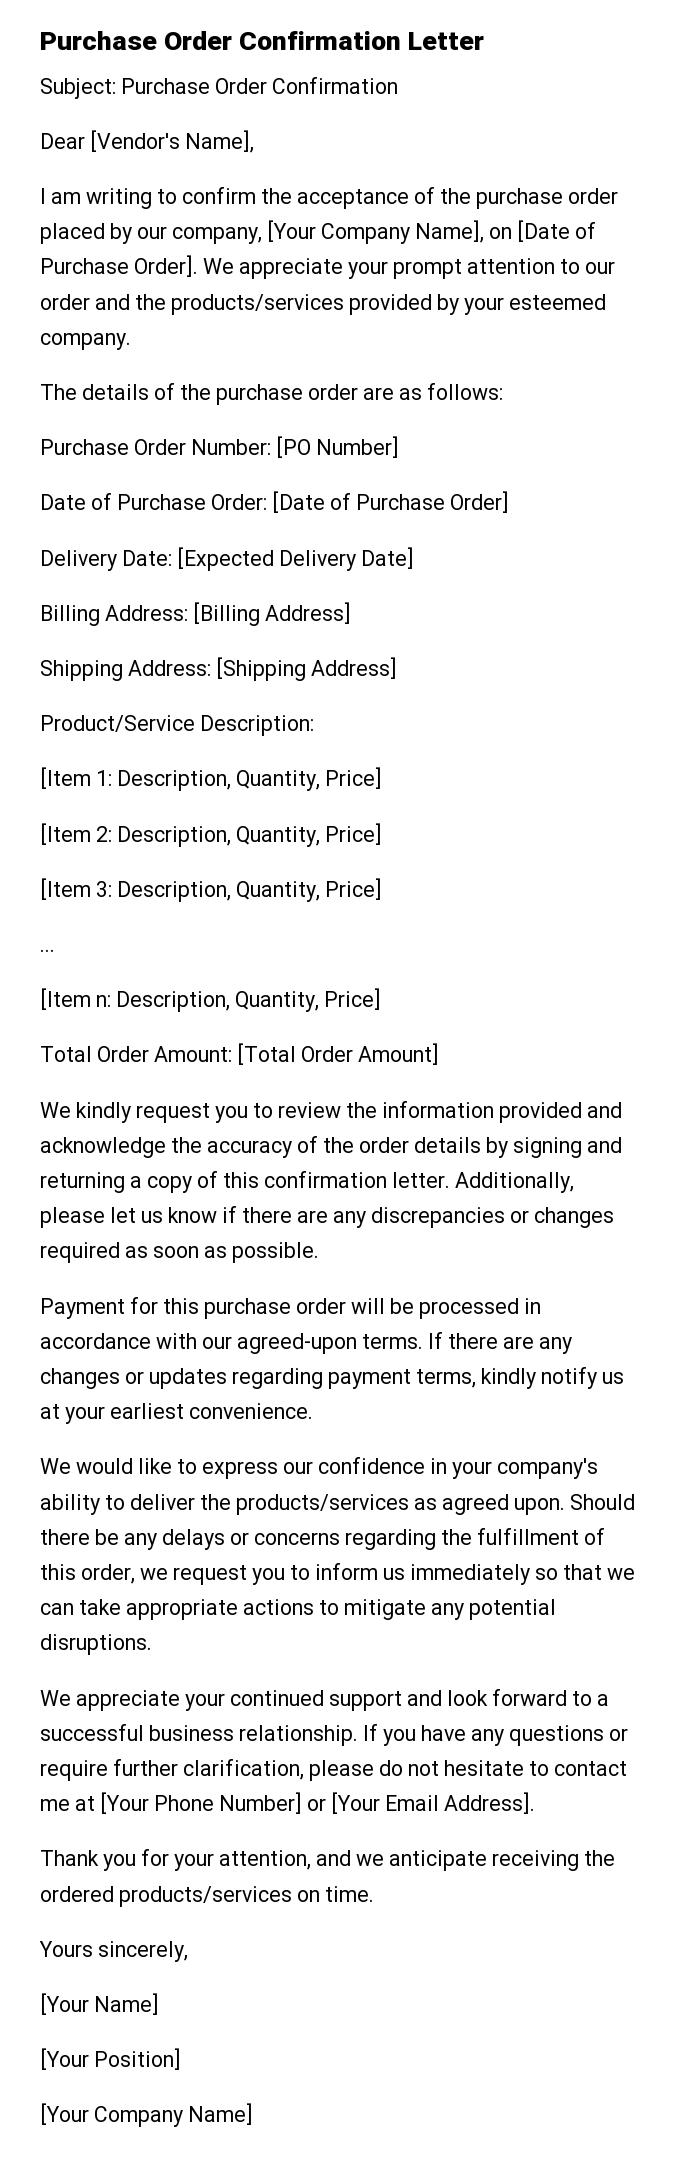 Purchase Order Confirmation Letter